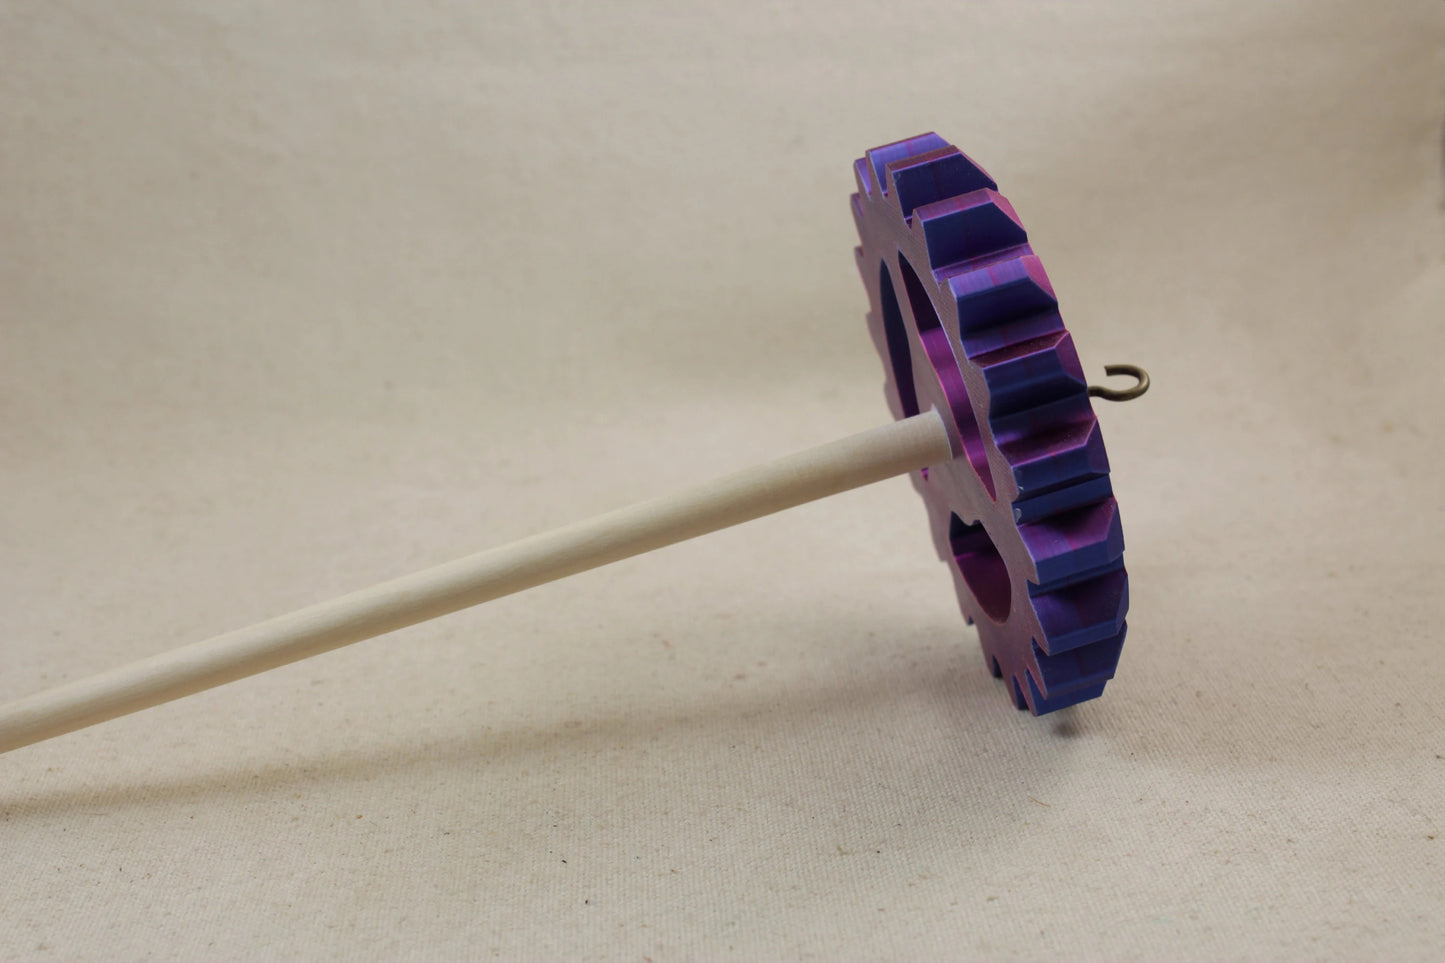 3D Printed Gear Spindle